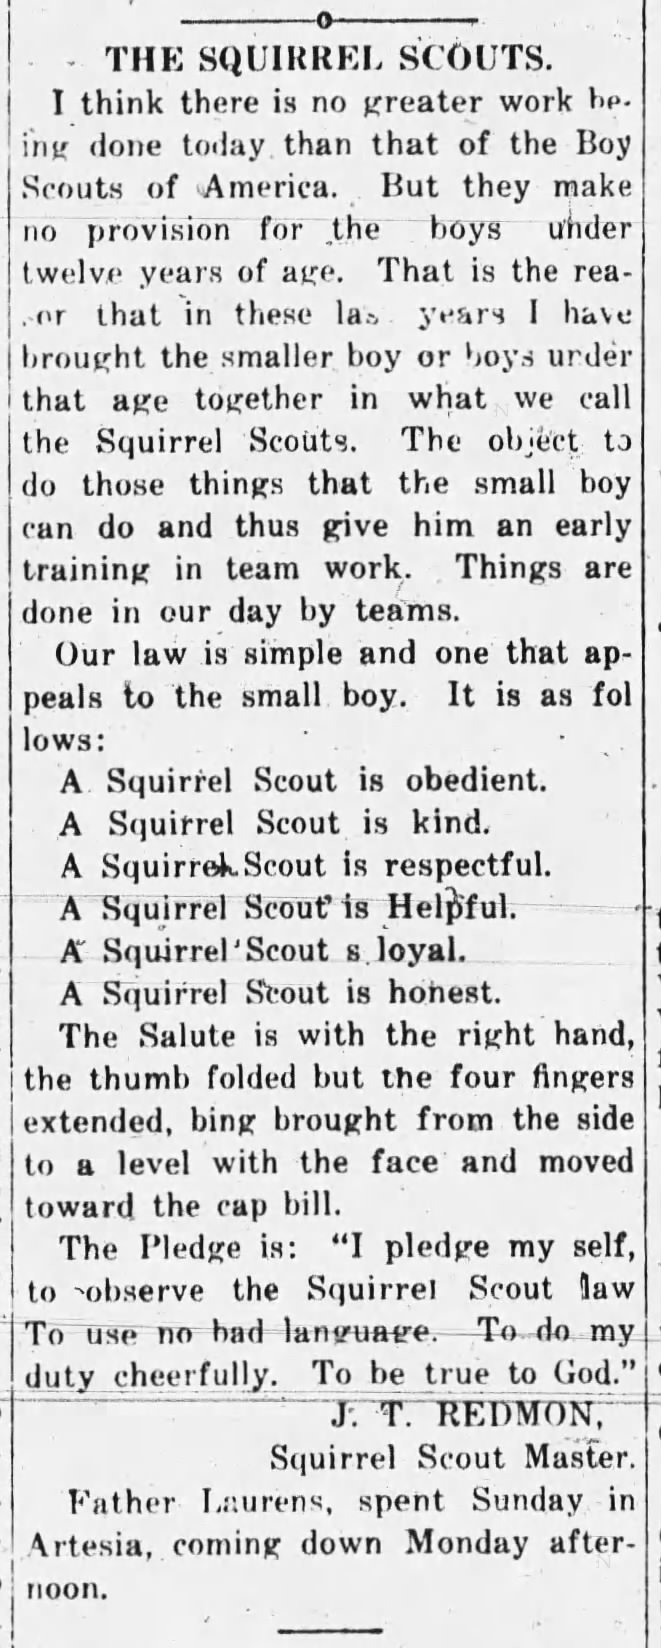 The Squirrel Scouts